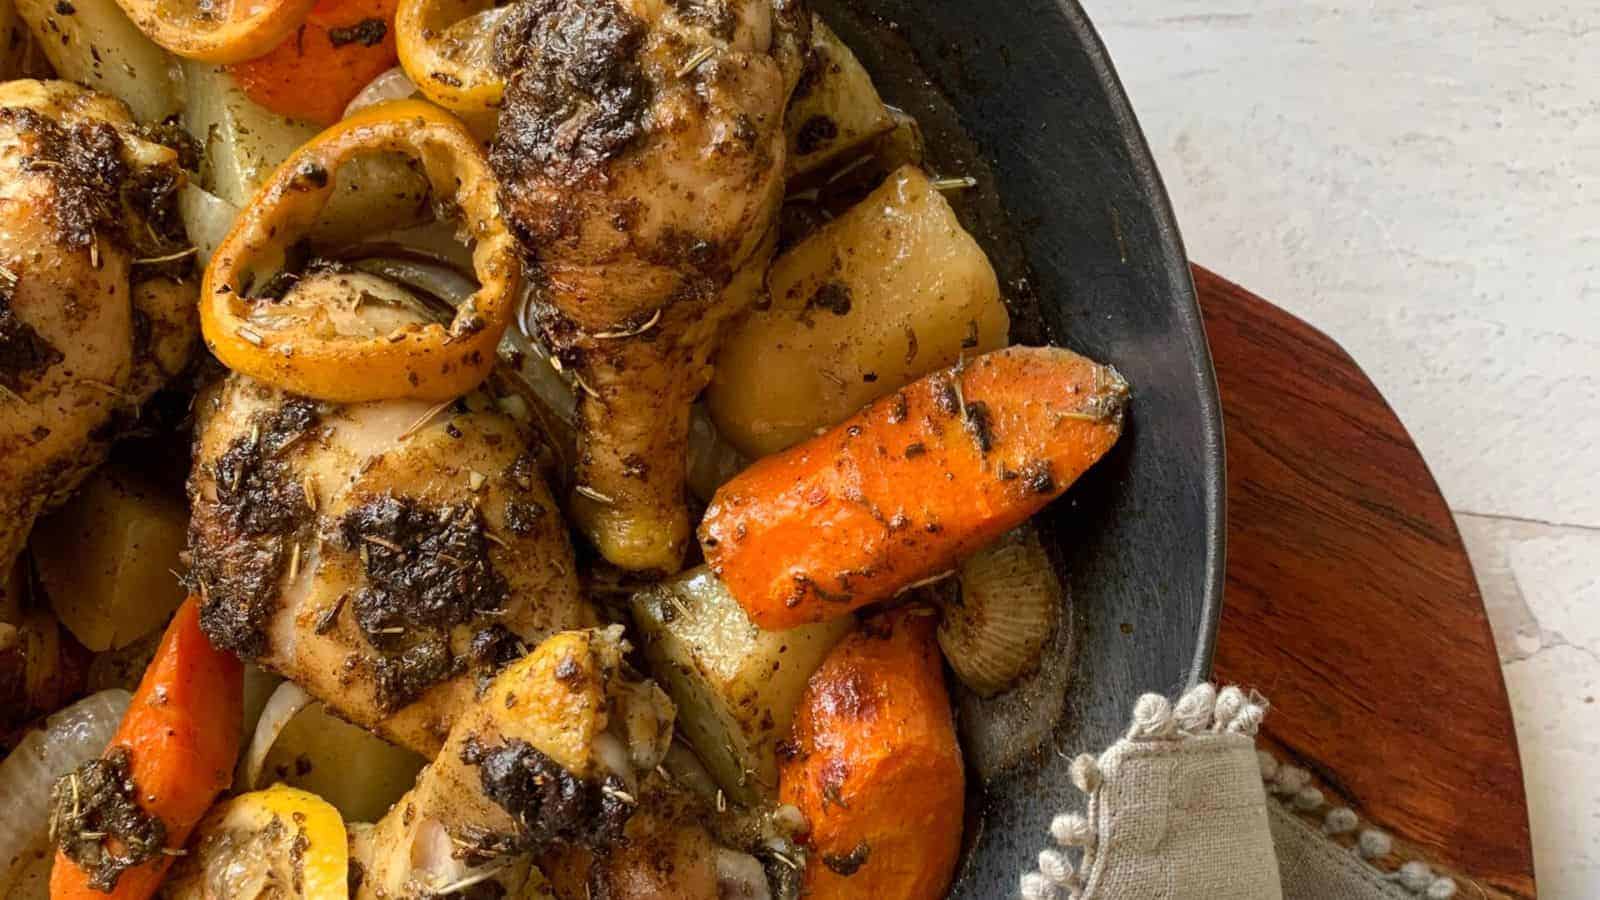 An iron skillet filled with hot chicken drumsticks and potatoes and carrots.